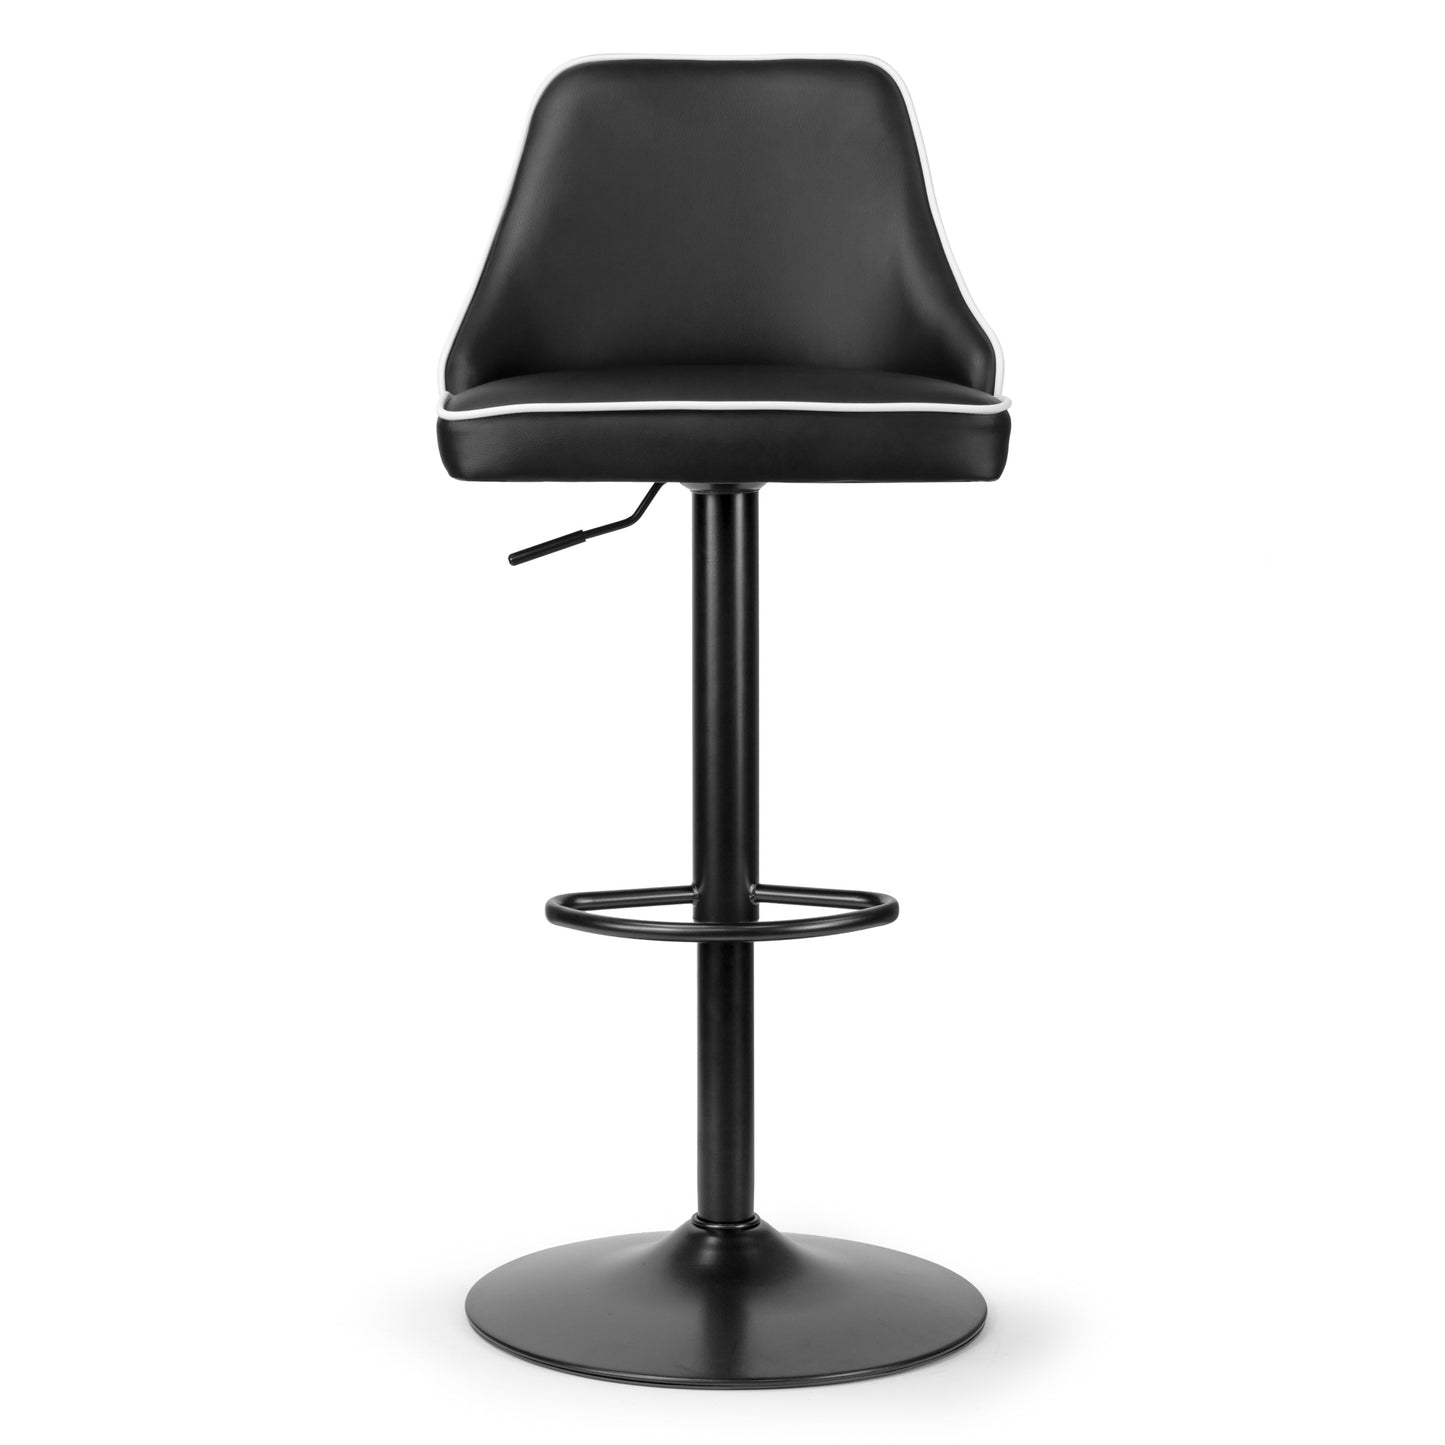 Set of 2 Alston Black Adjustable Height Swivel Bar Stool with White Piping